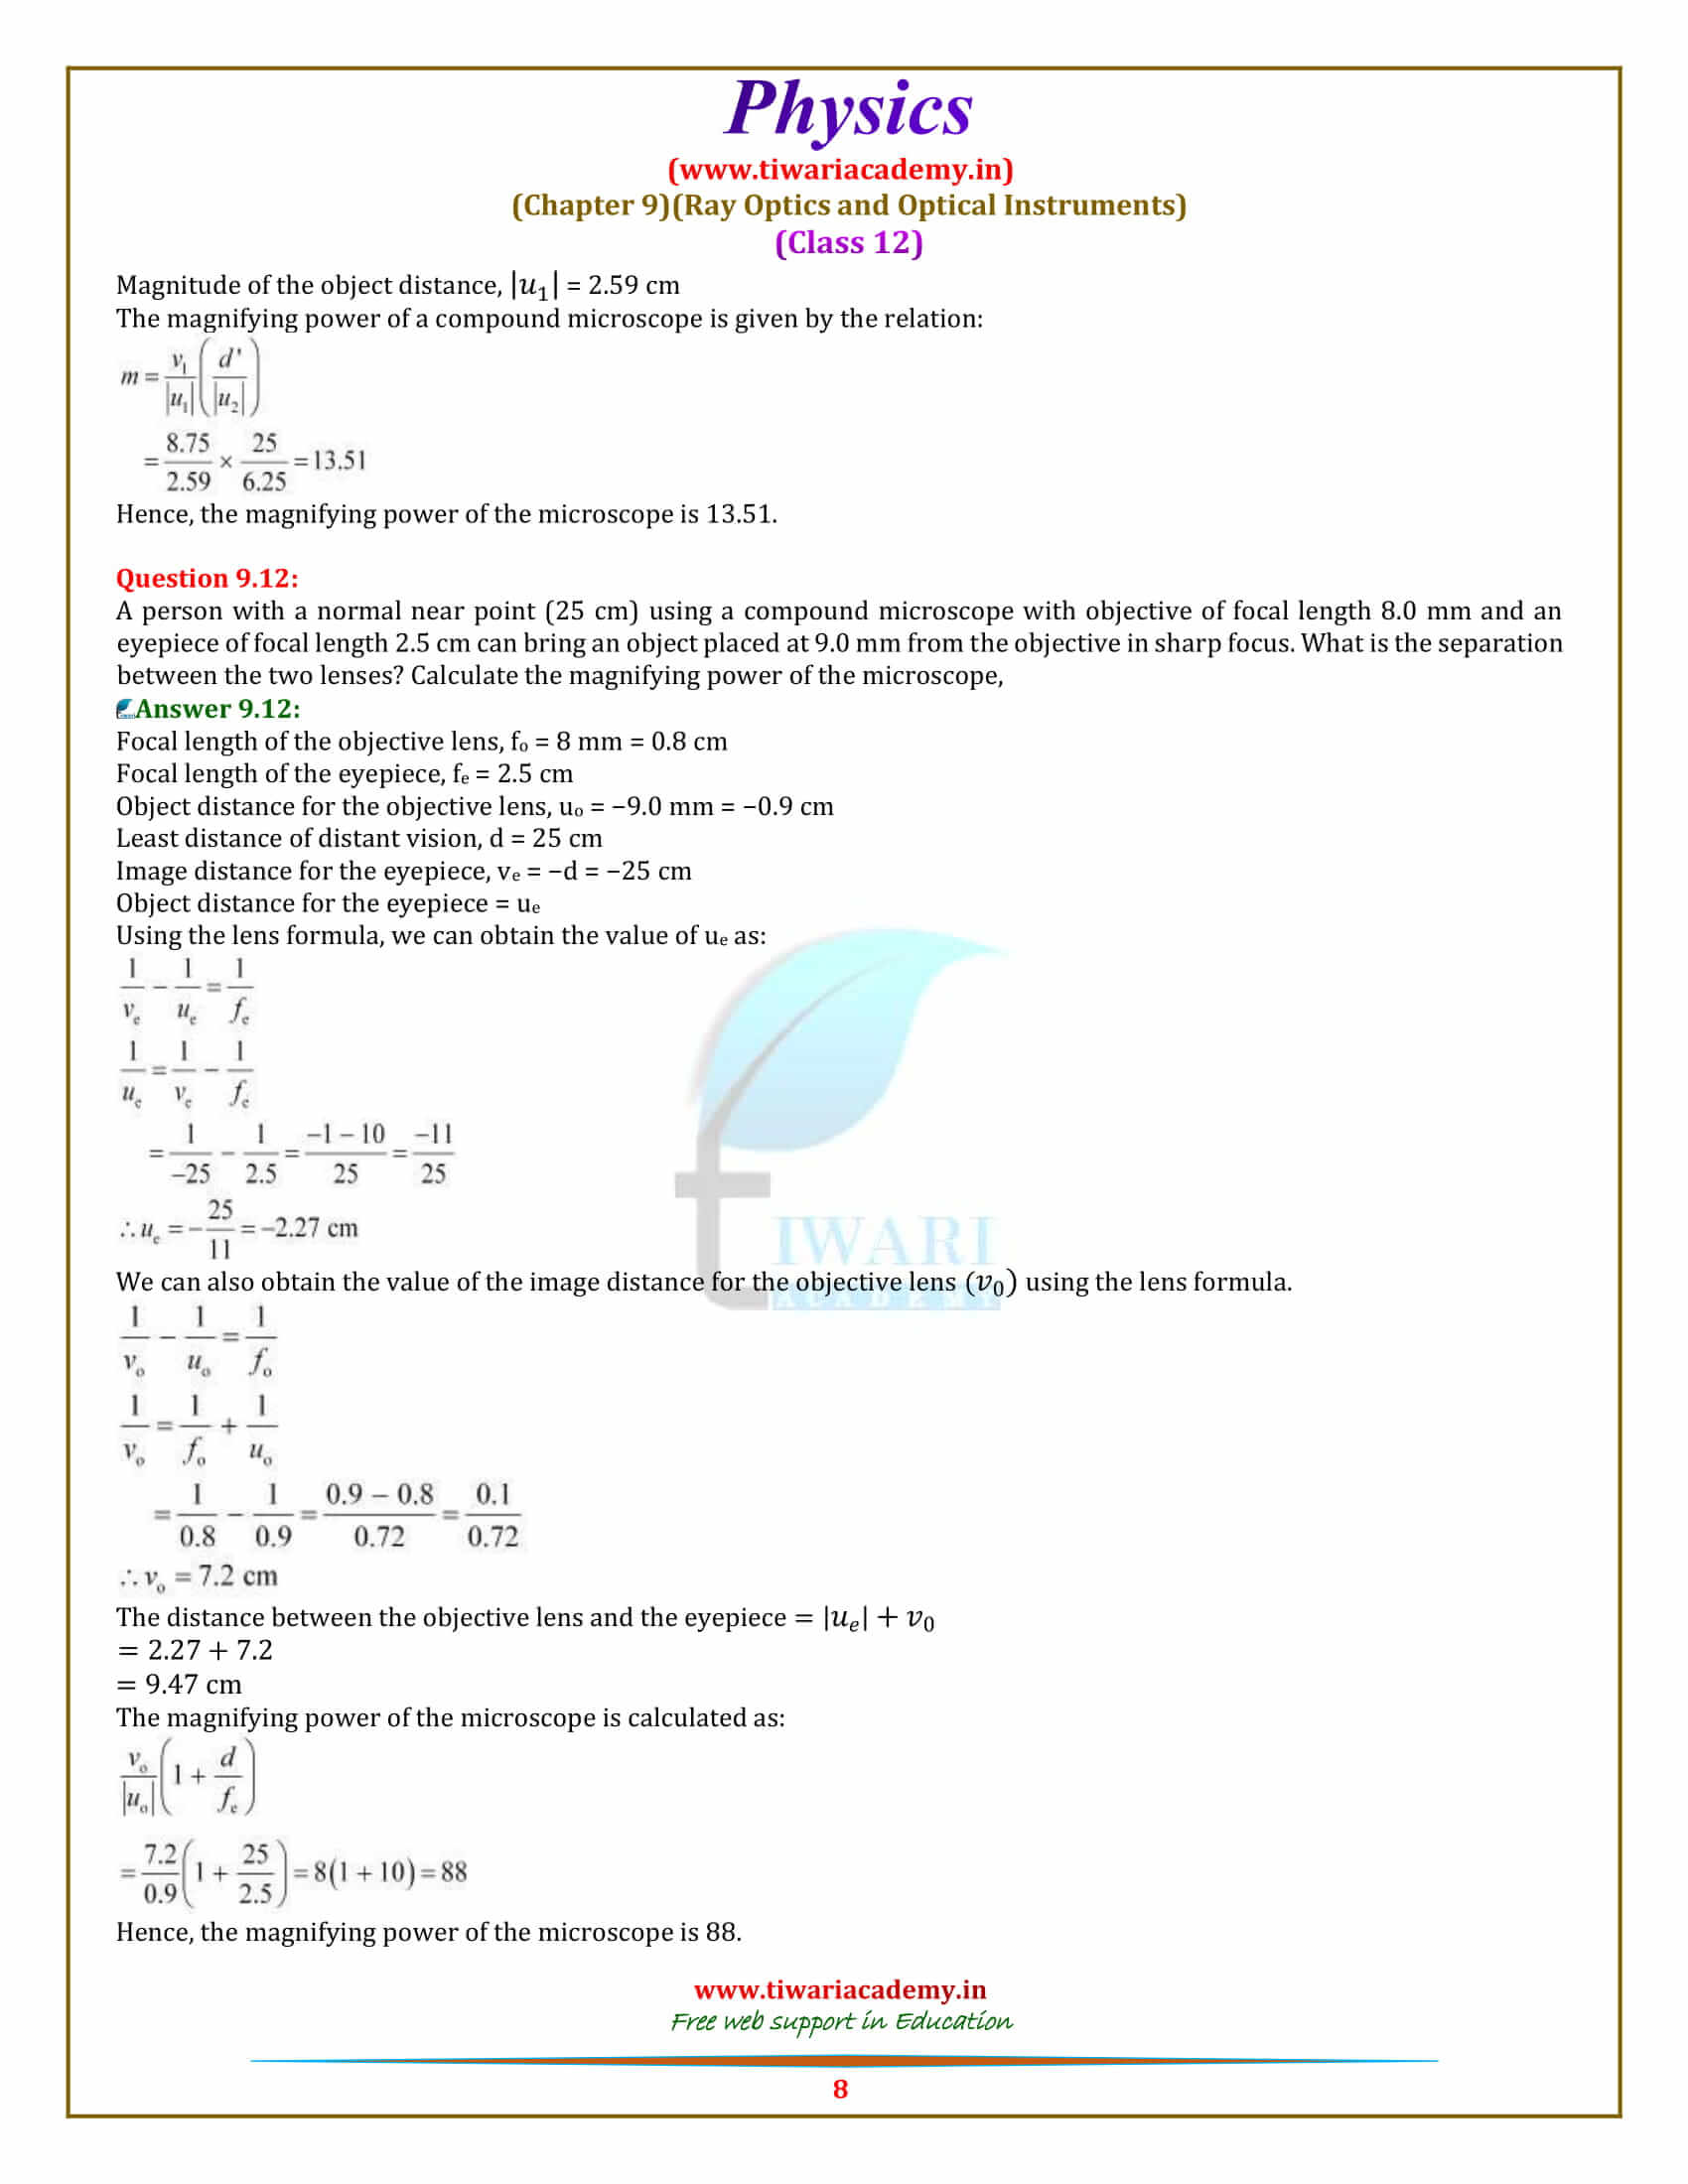 NCERT Solutions for Class 12 Physics Chapter 9 in pdf form